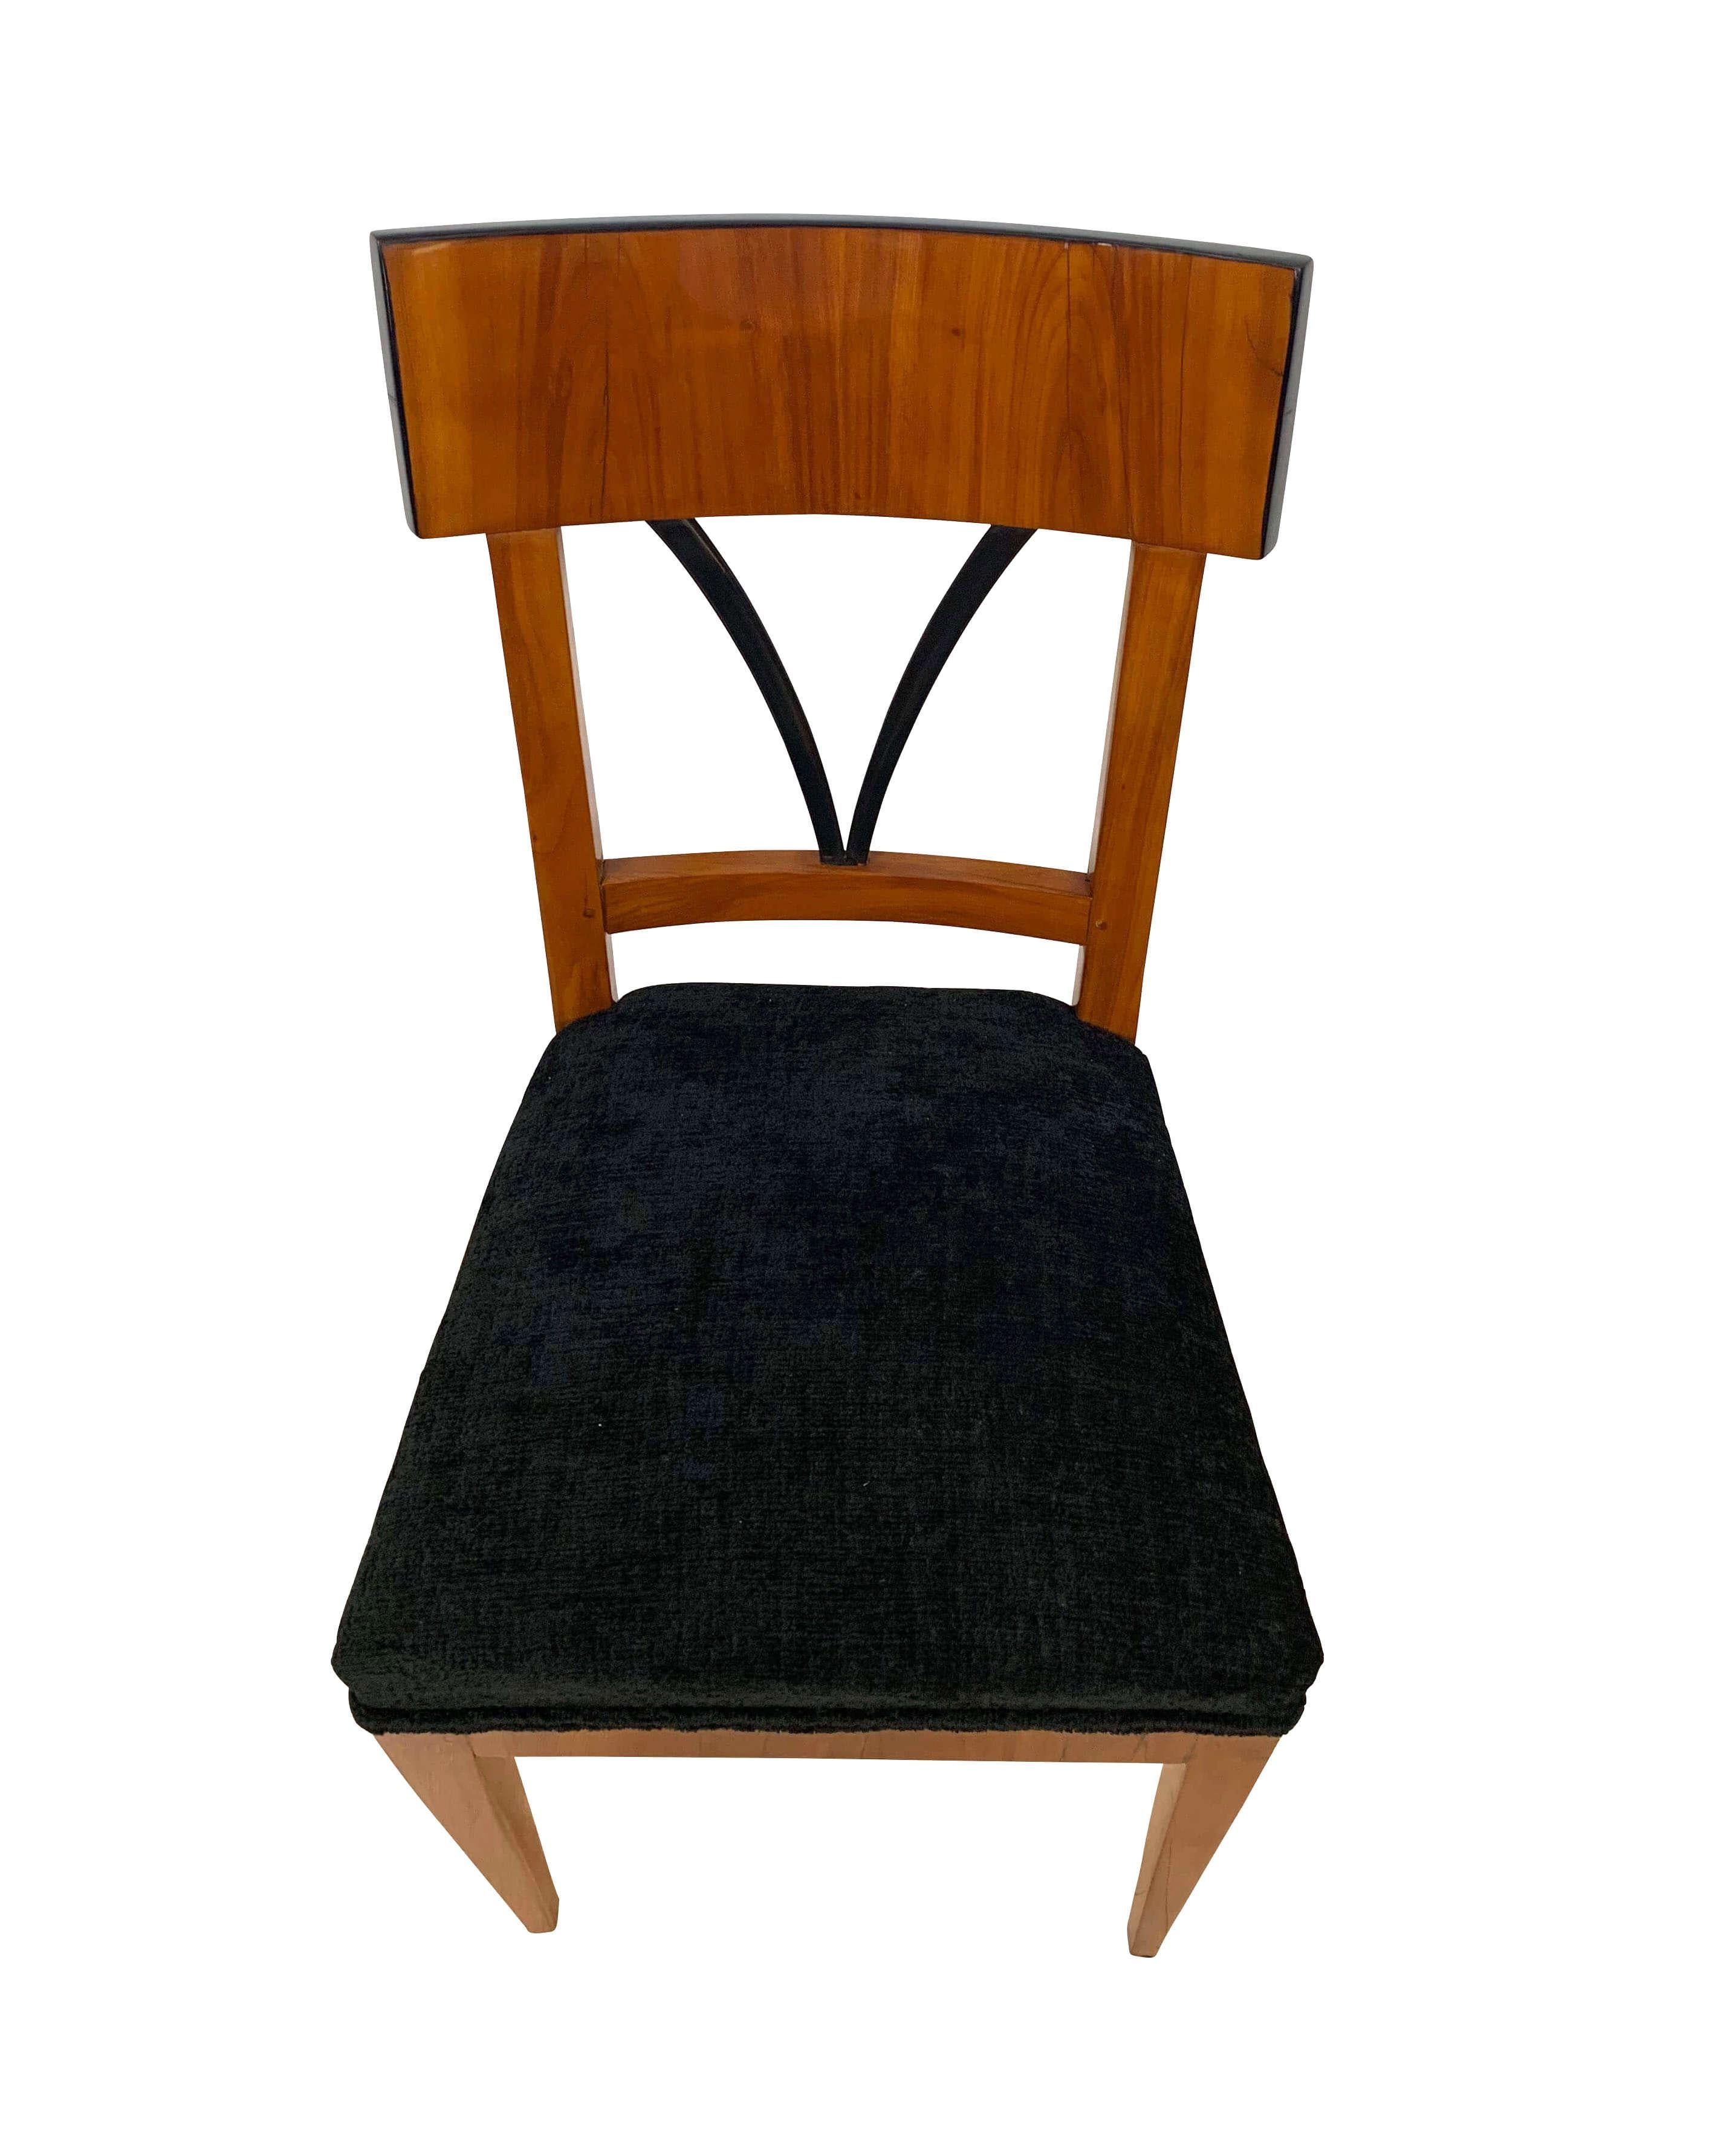 Beautiful Biedermeier side chair in cherry and black. Provenience: South Germany, circa 1820.

Cherry veneered, shellac hand-polished.
Ebonized double reed sprouting. High veneered backboard.
Newly upholstered and covered with black mottled